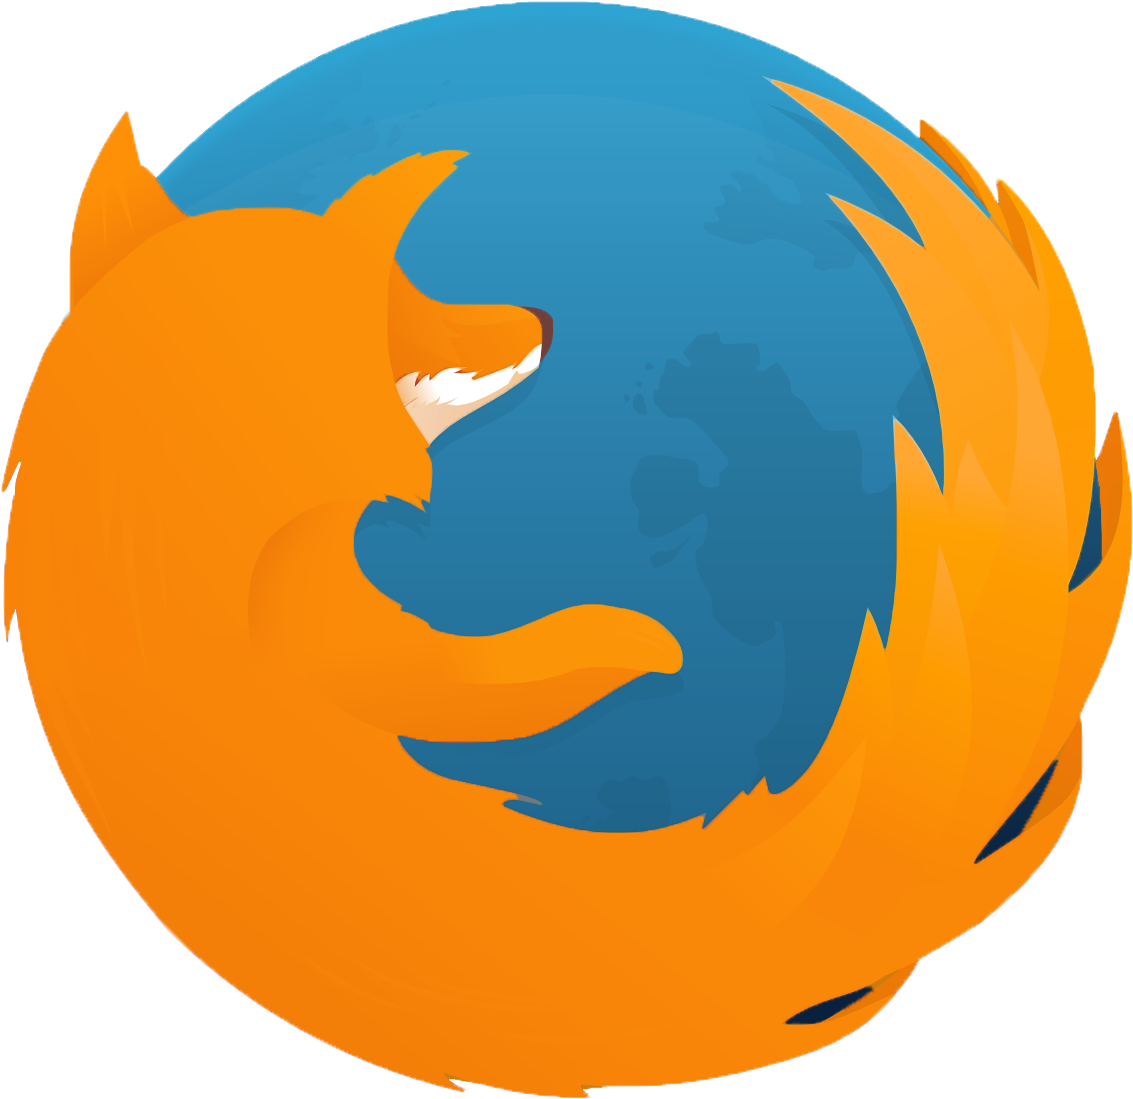 A Logo Of A Fox And A Globe